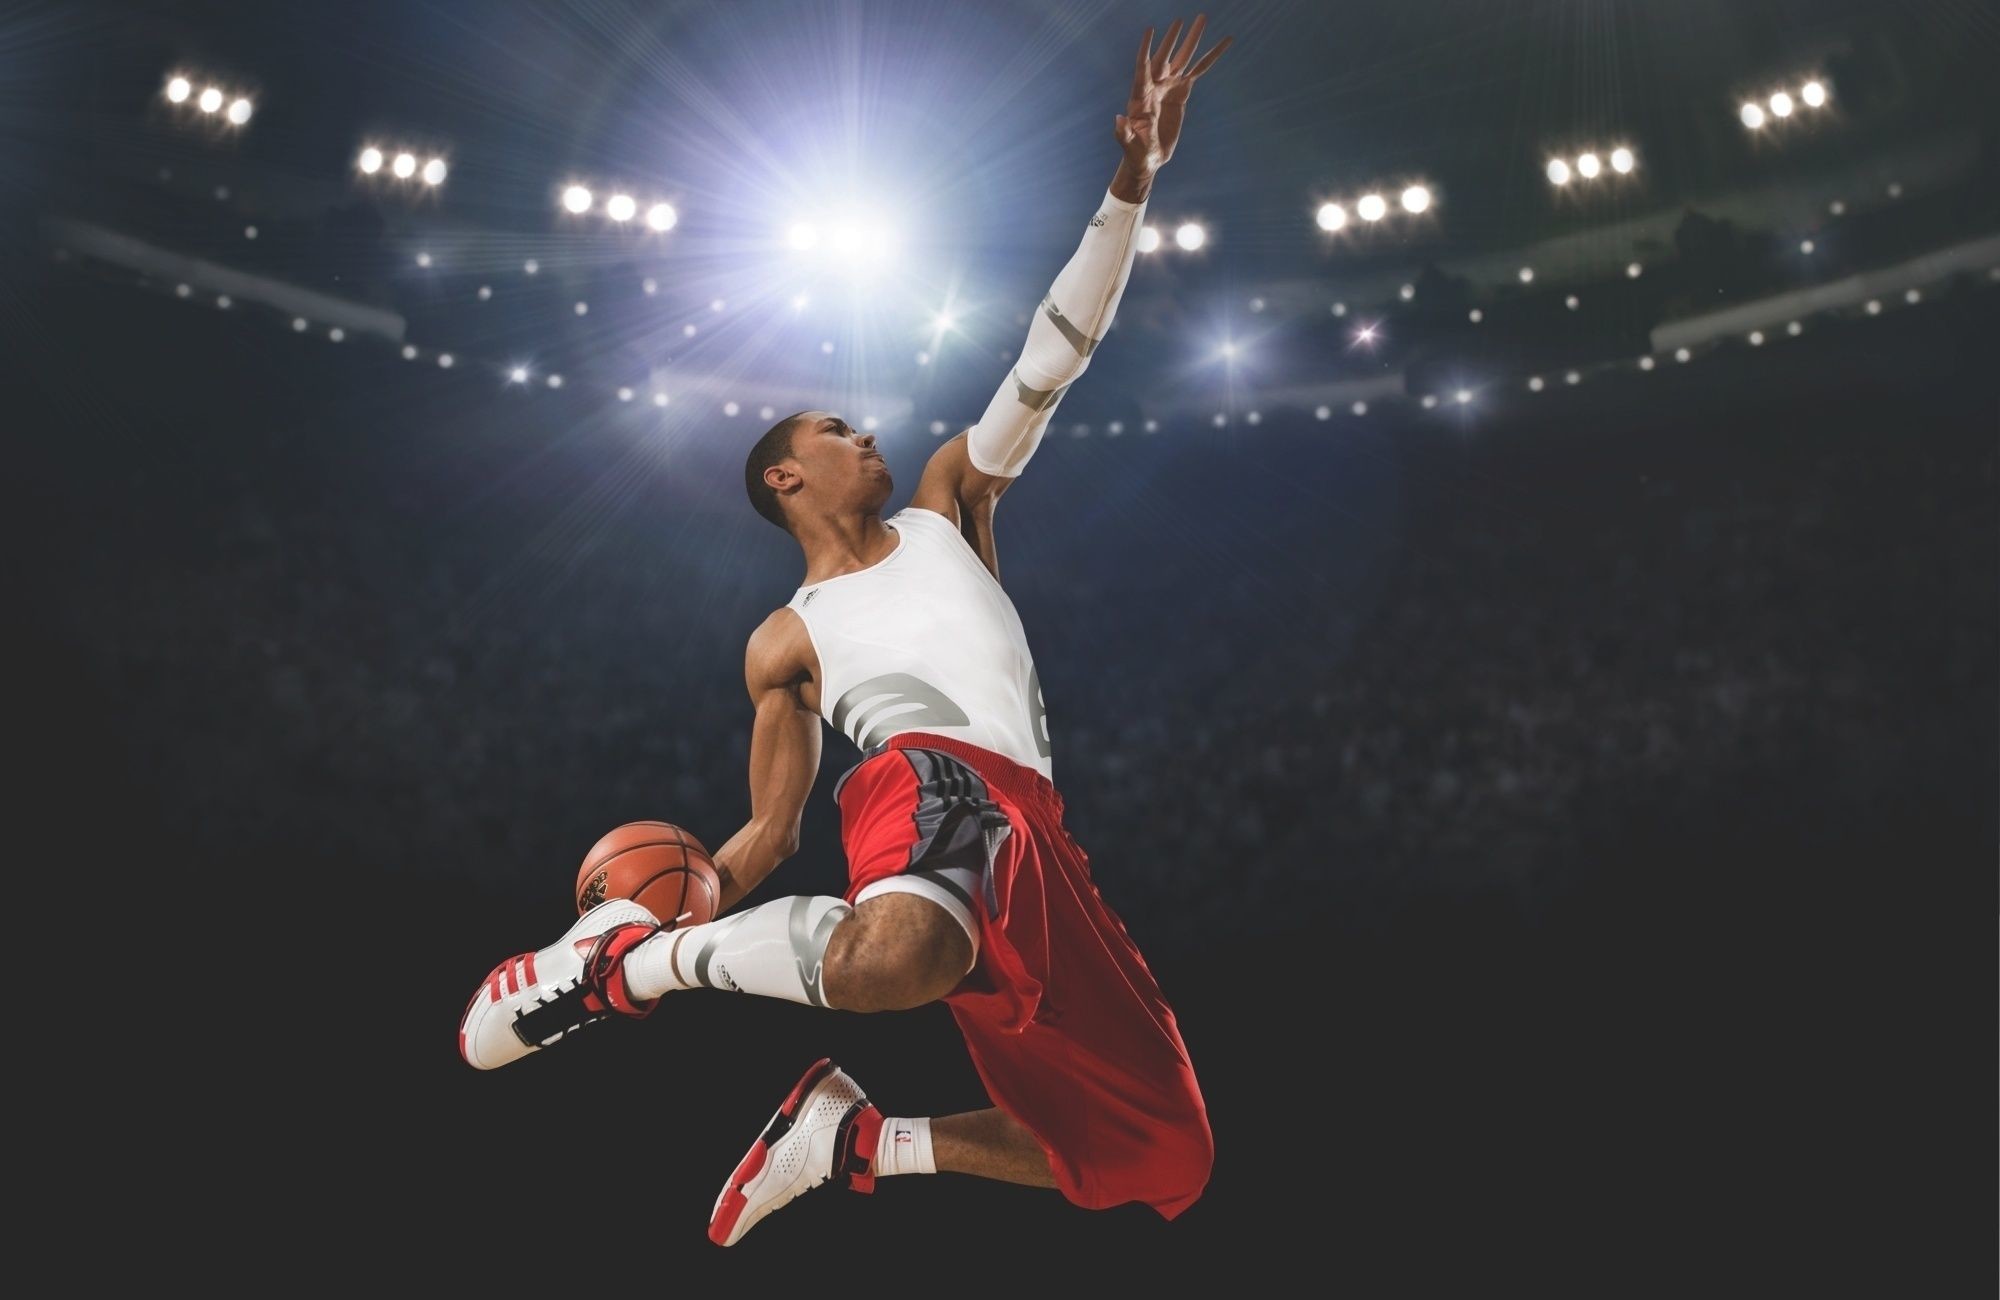 2000x1300 Nike Basketball Wallpapers for Laptops 3108 - HD Wallpaper Site